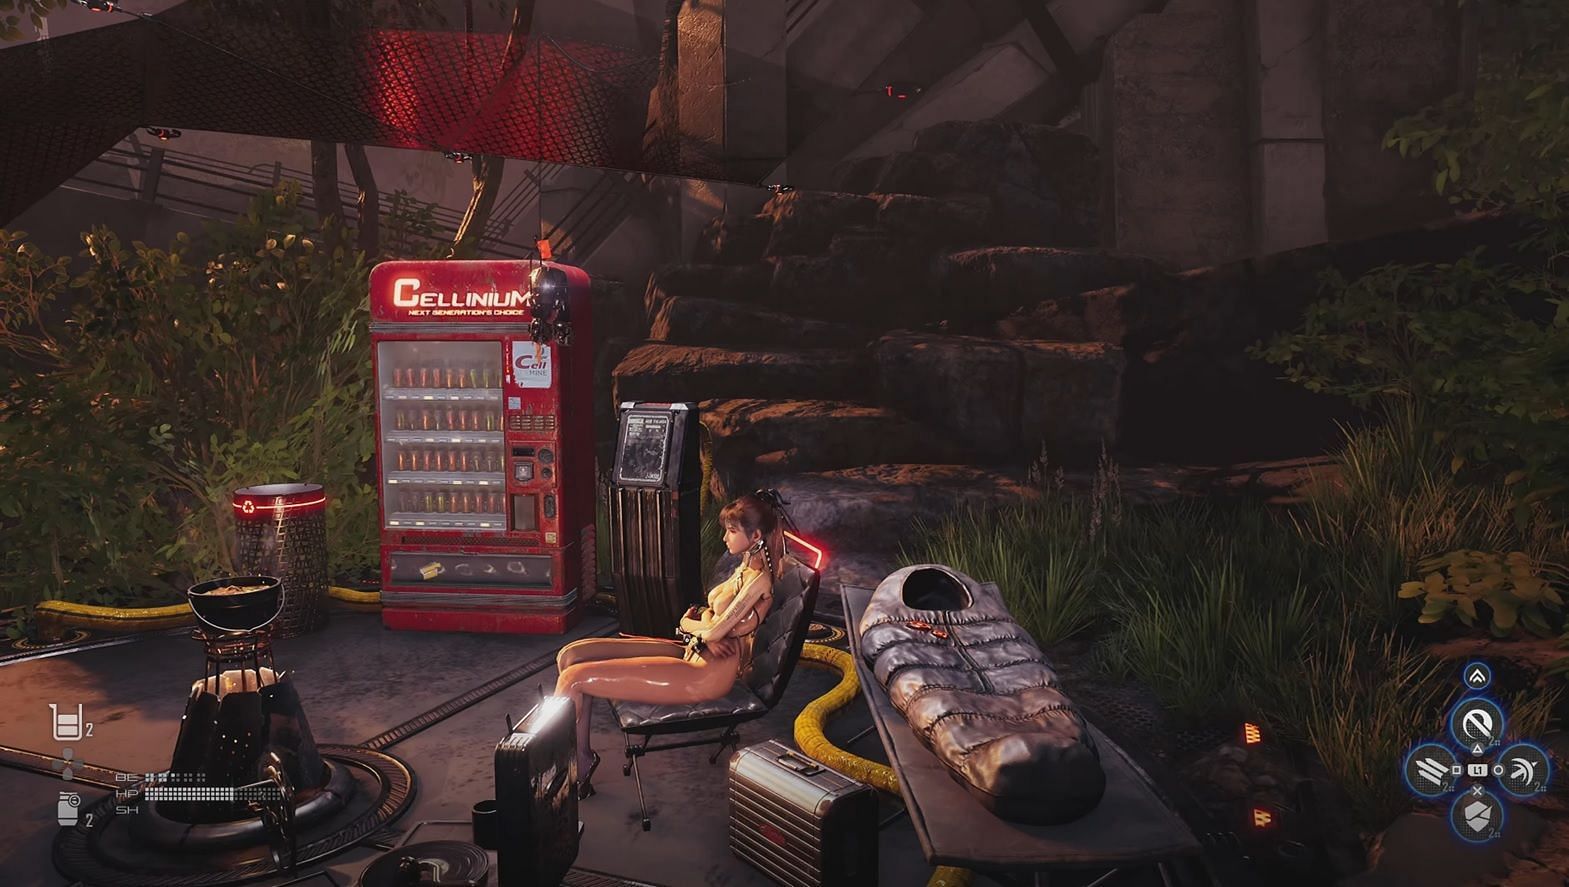 Protagonist Eve as seen near a camp in the game (Image via Sony Interactive Entertainment)